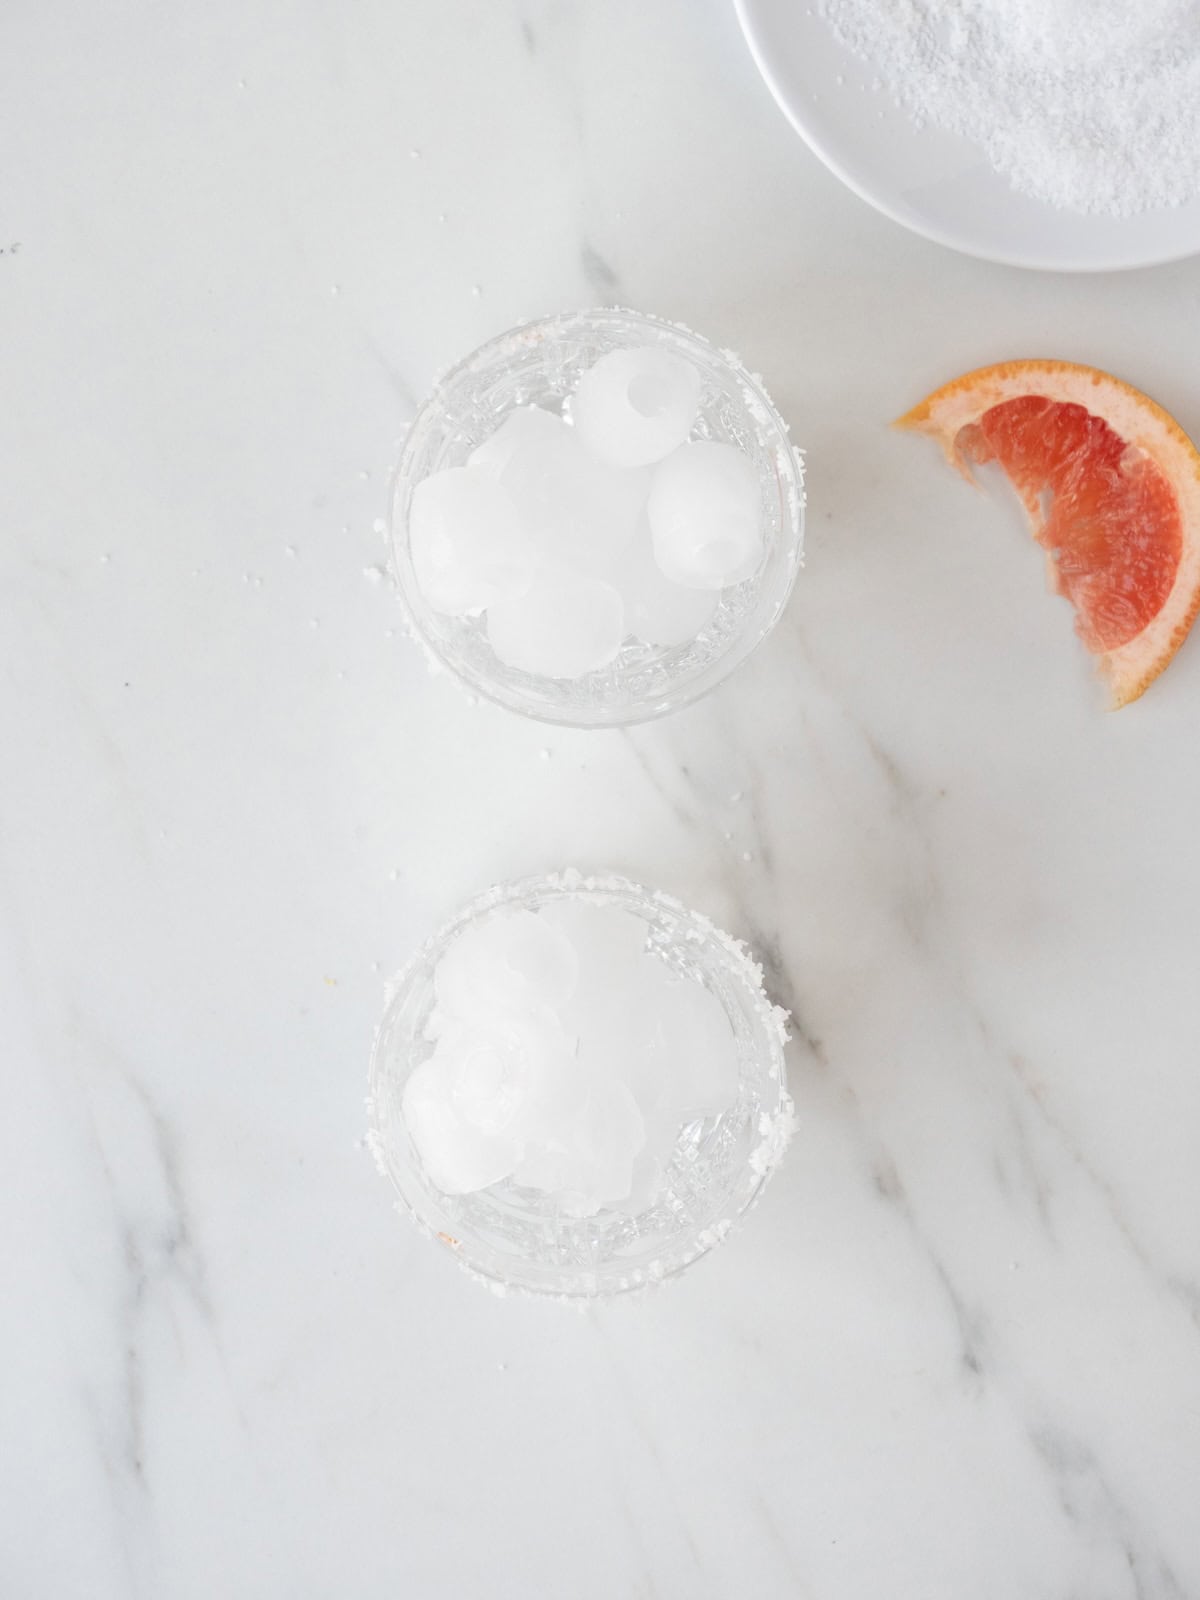 Two salt rim cocktail glasses with ice in them along with a grapefruit wedge and a small plate with salt on the side.